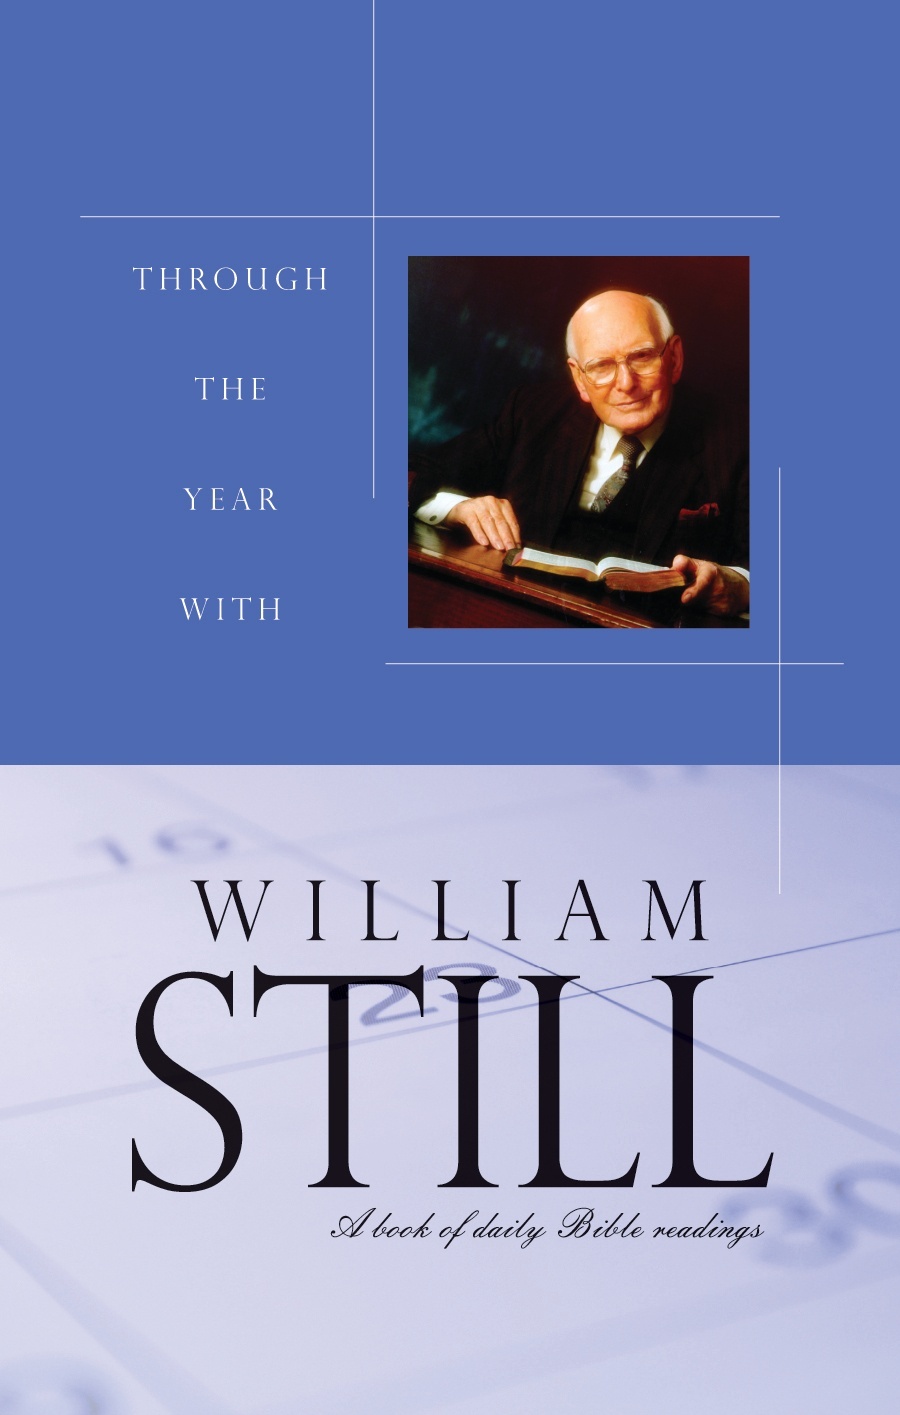 Through the Year With William Still